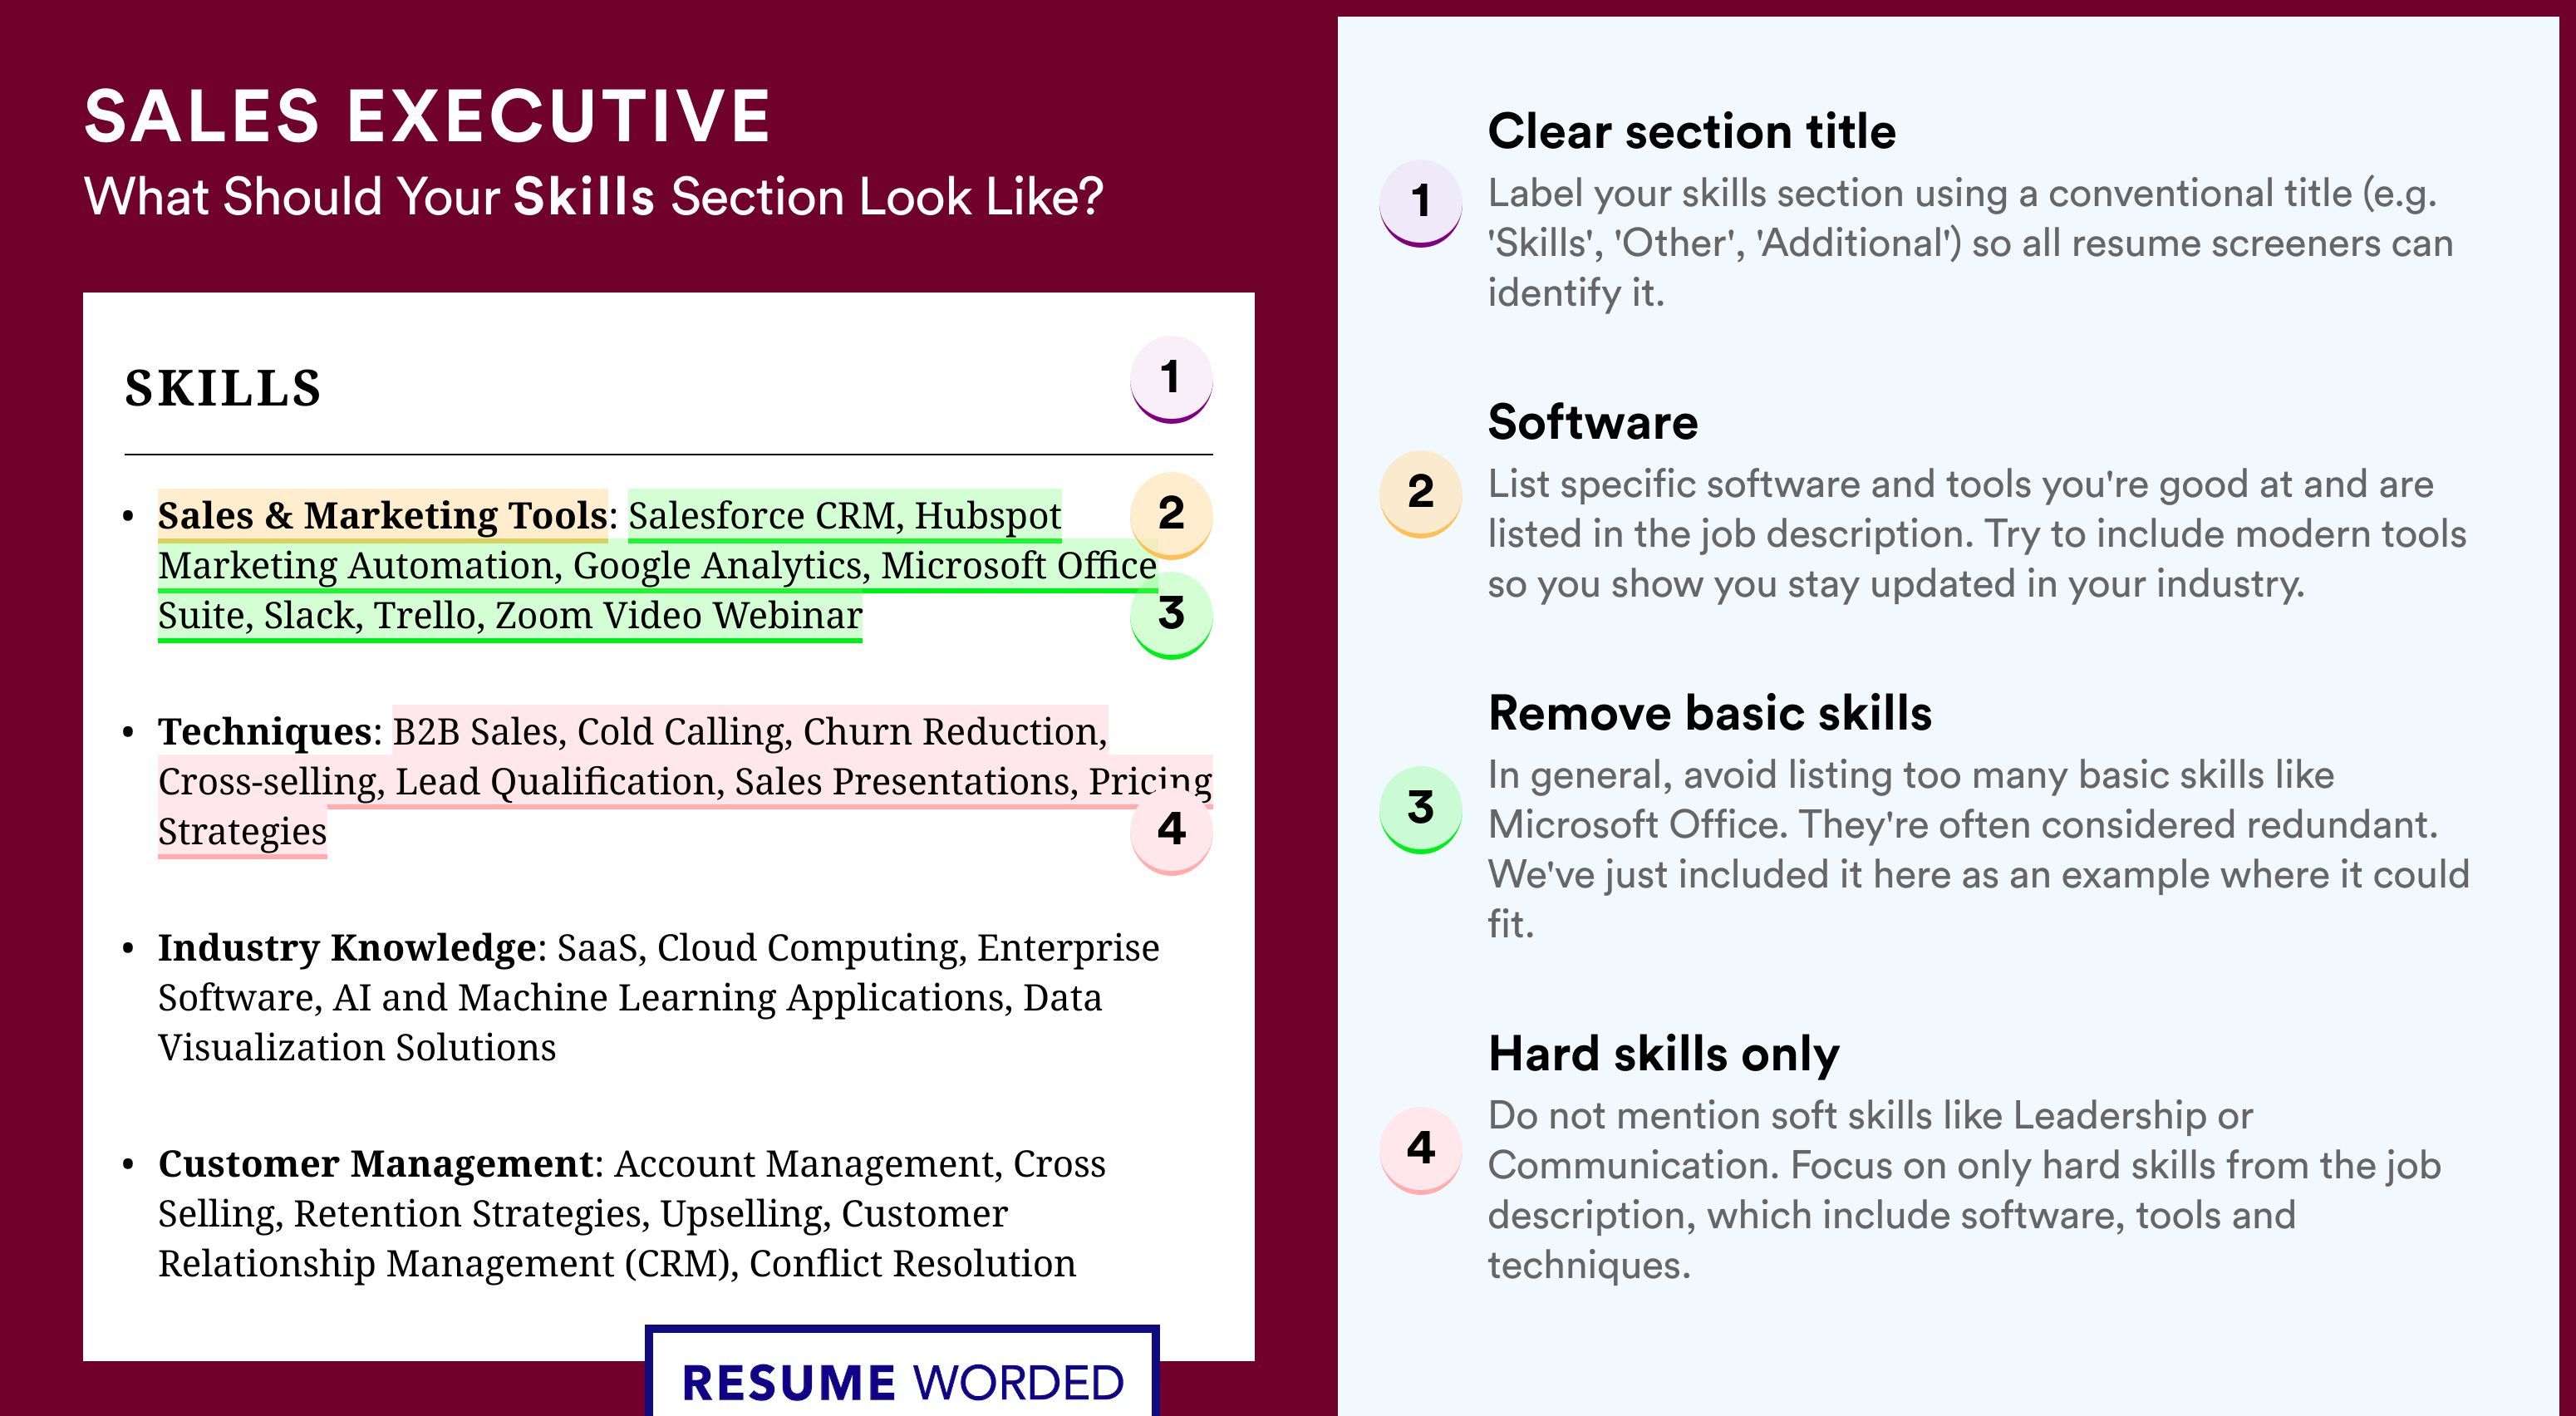 How To Write Your Skills Section - Sales Executive Roles